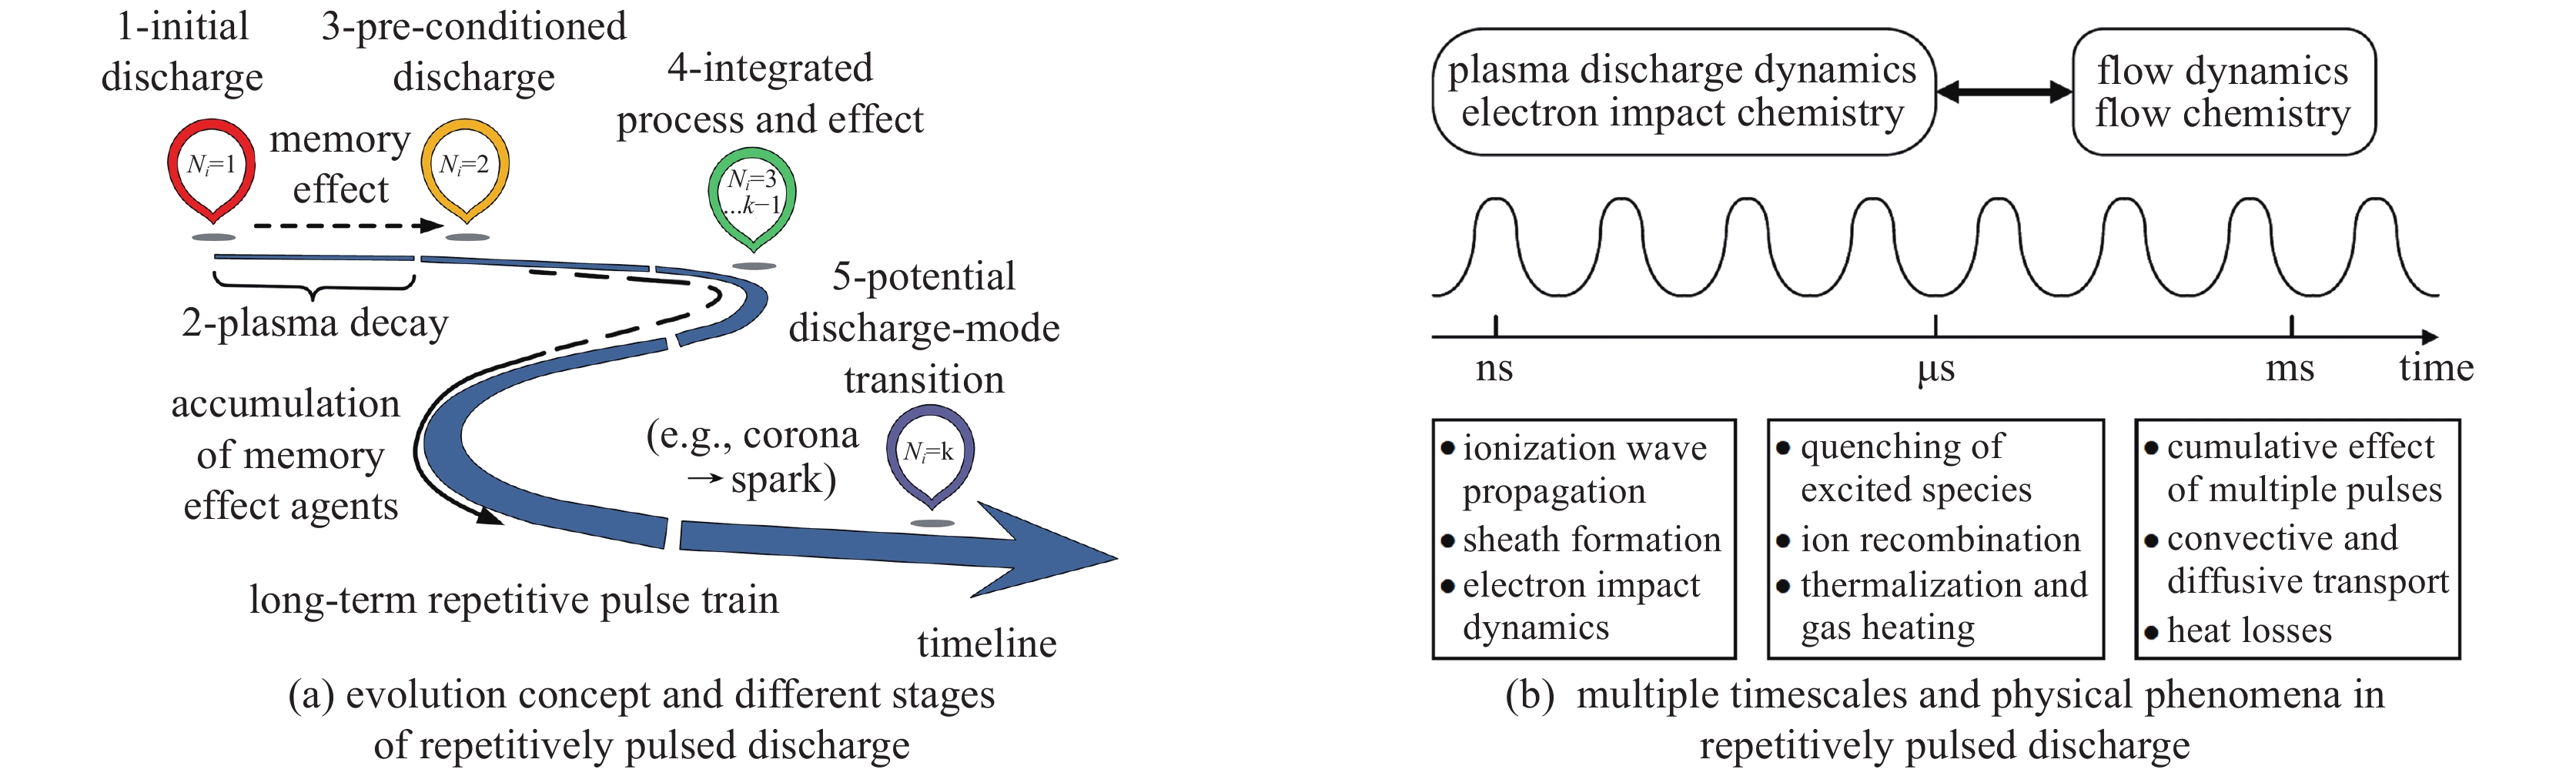 Fundamental evolution stages and multi-timescale physical processes in repetitively pulsed streamer discharge[21-22]